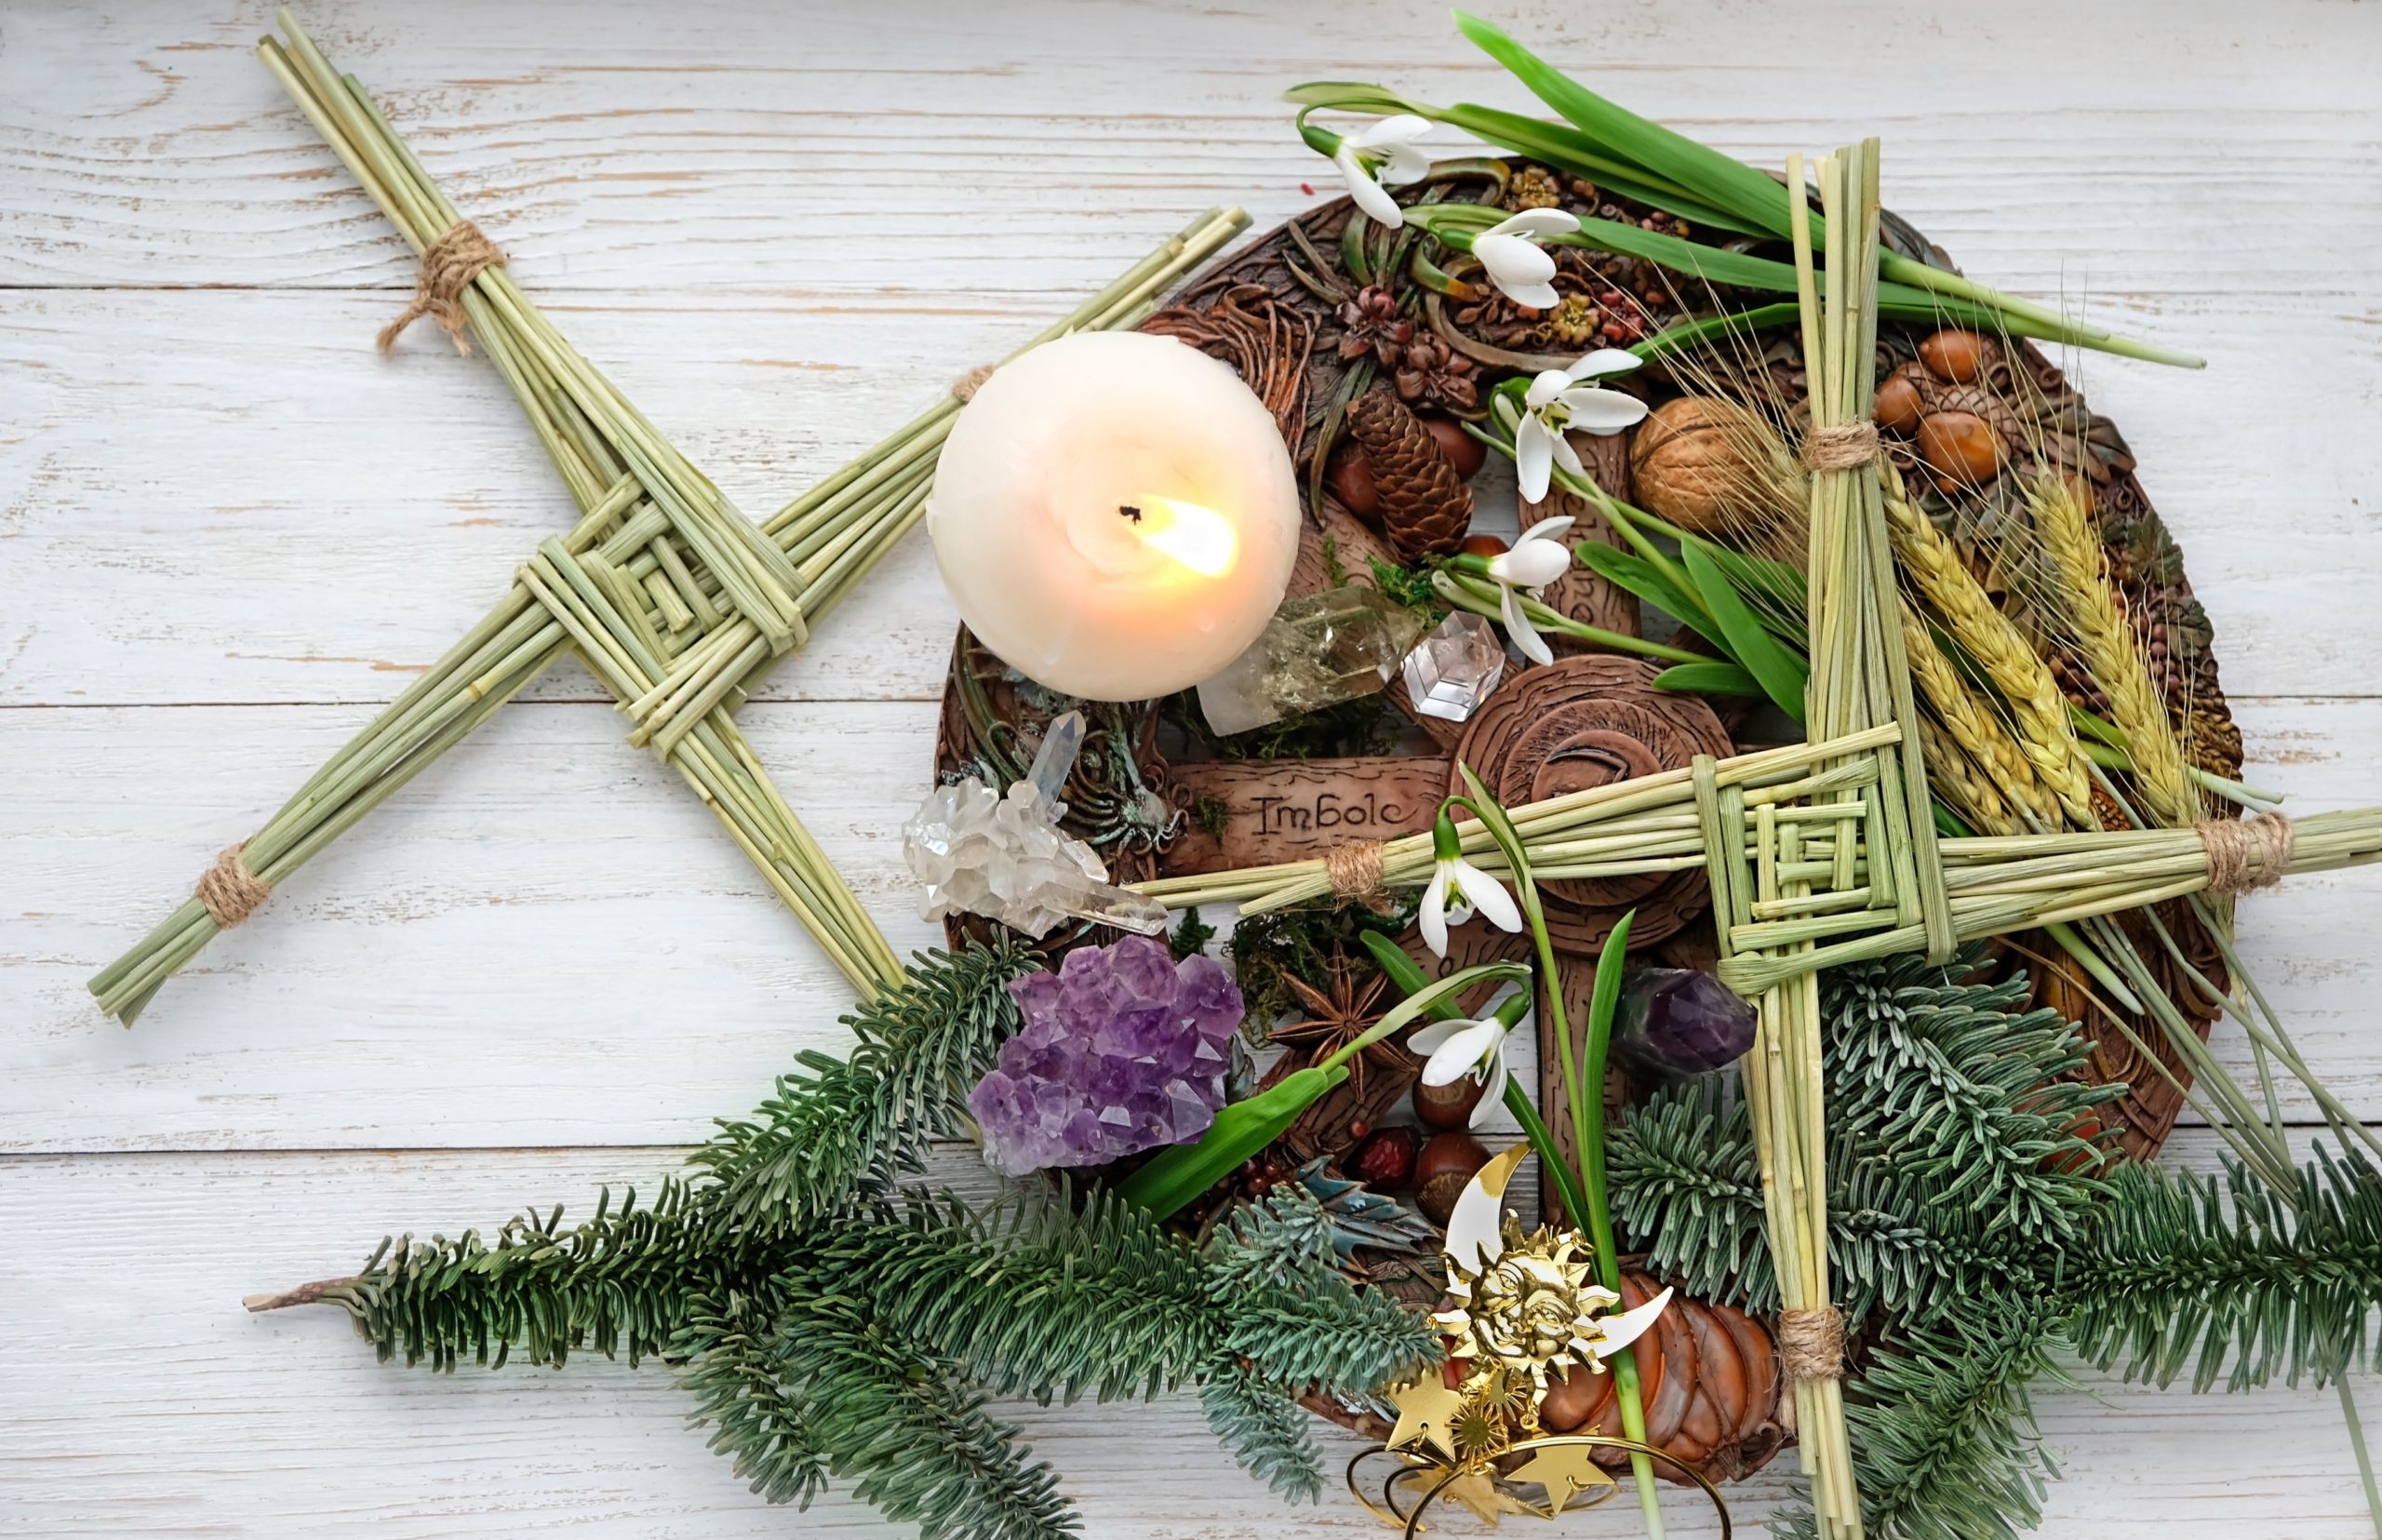 St. Brigid's cross and wheel of ancient Celtic holidays with a lit candle and flowers